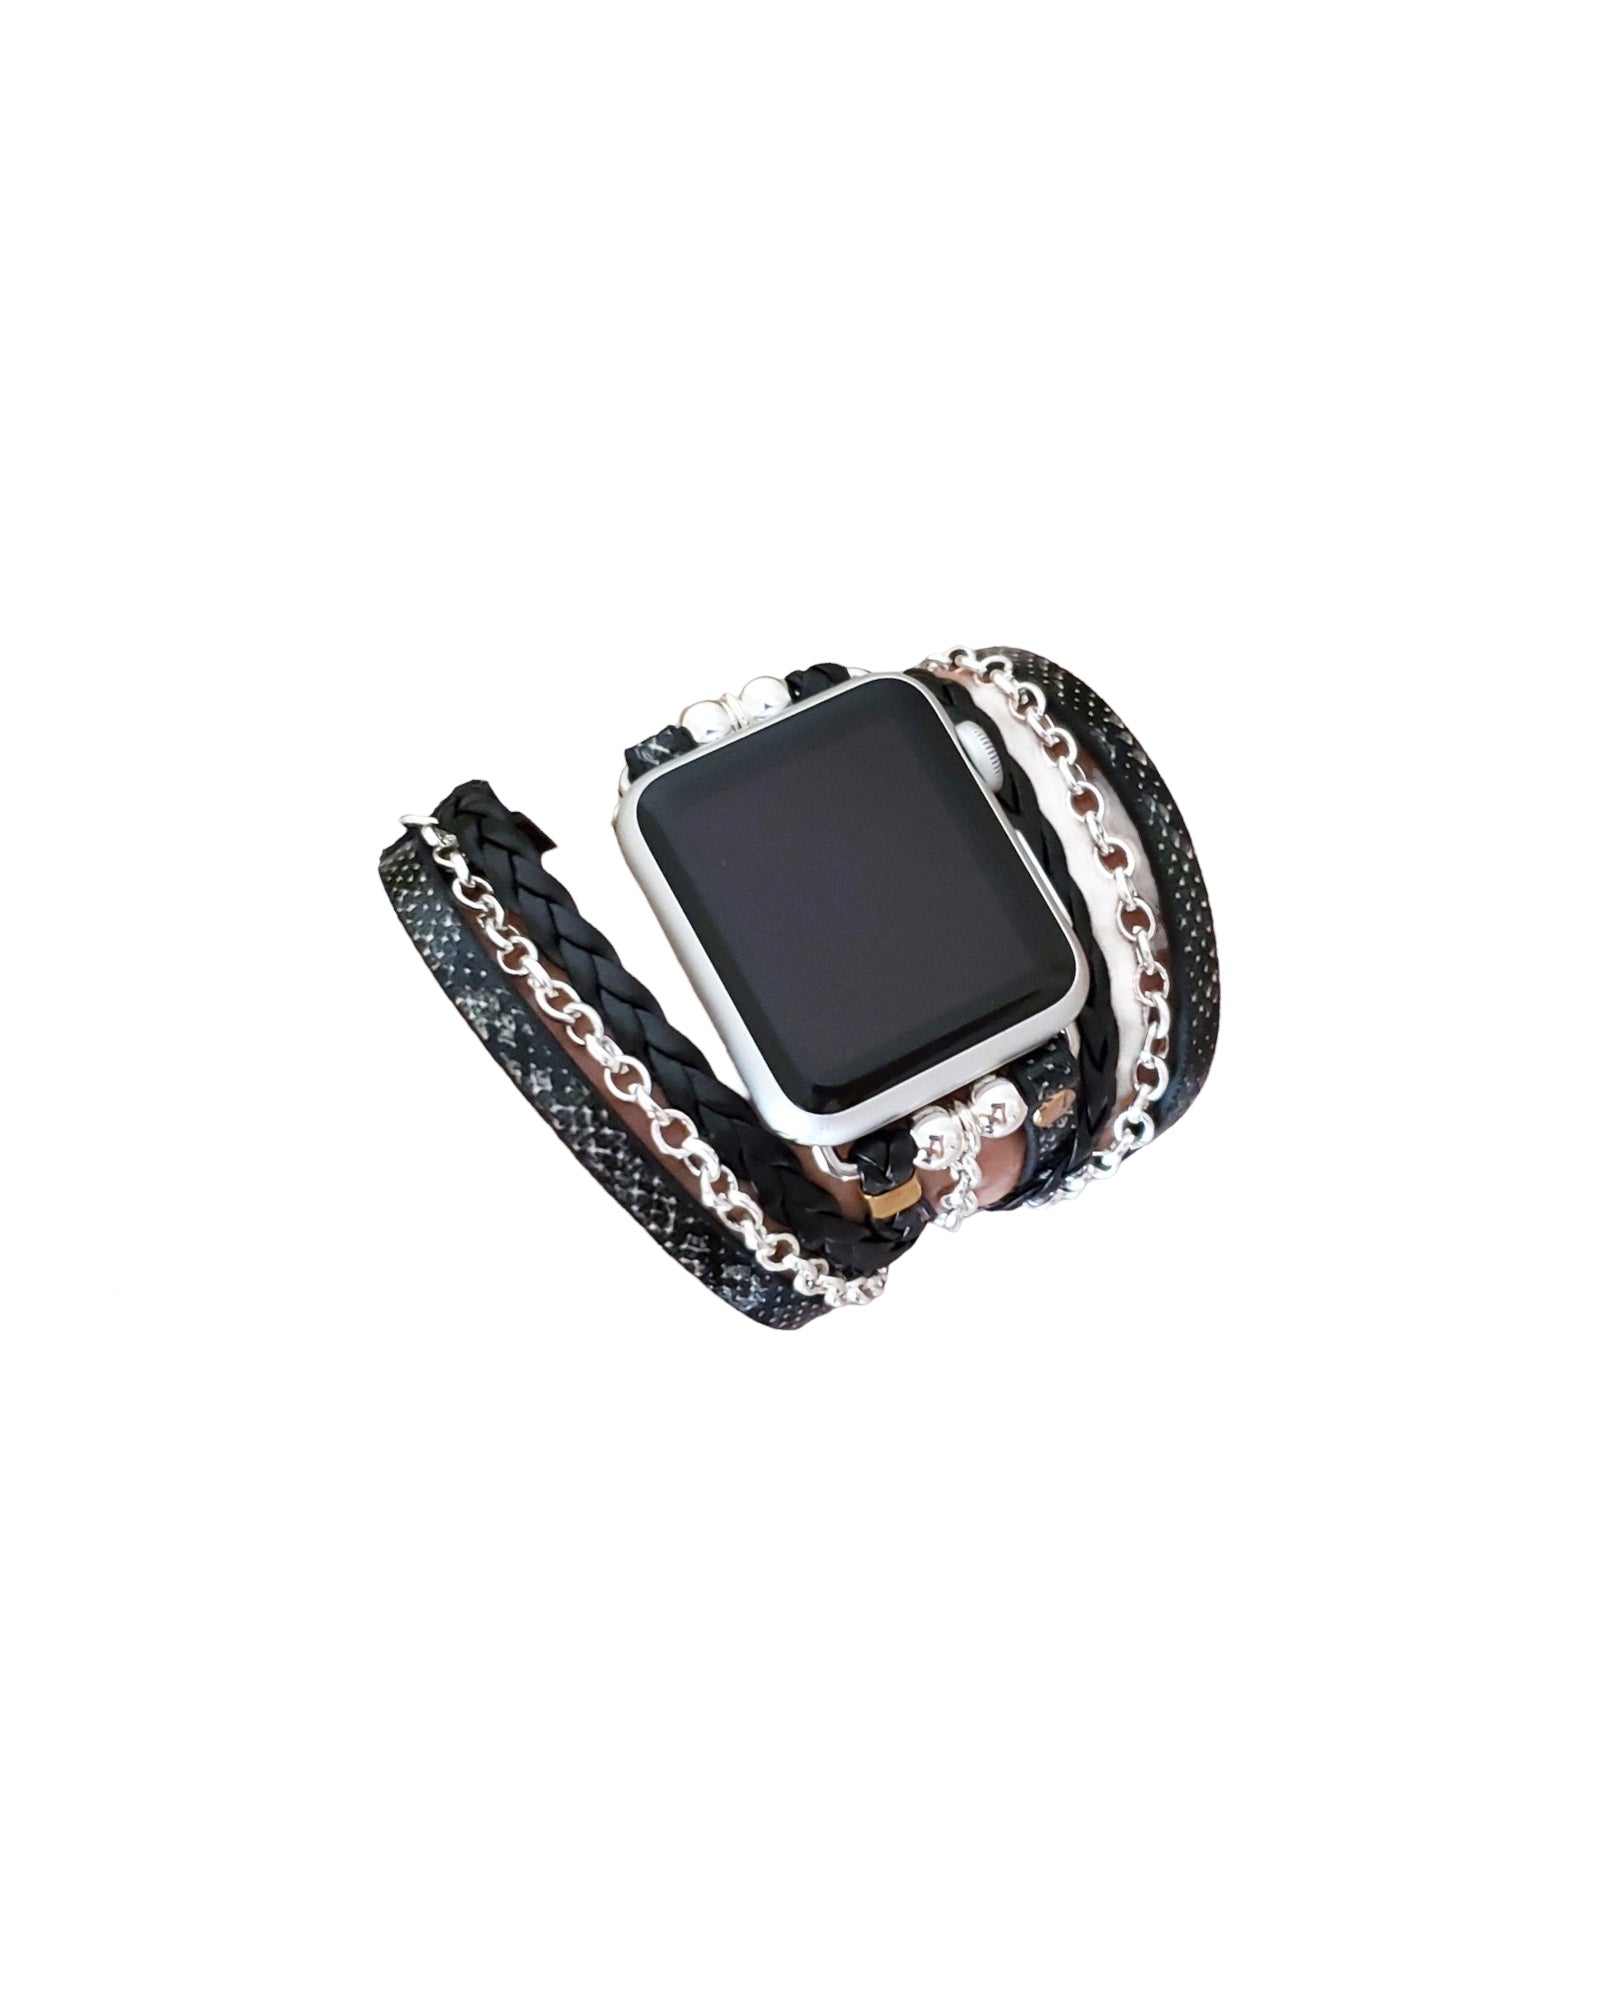 Boho Chic Wrap Snake Skin Watch Band with Silver Chain